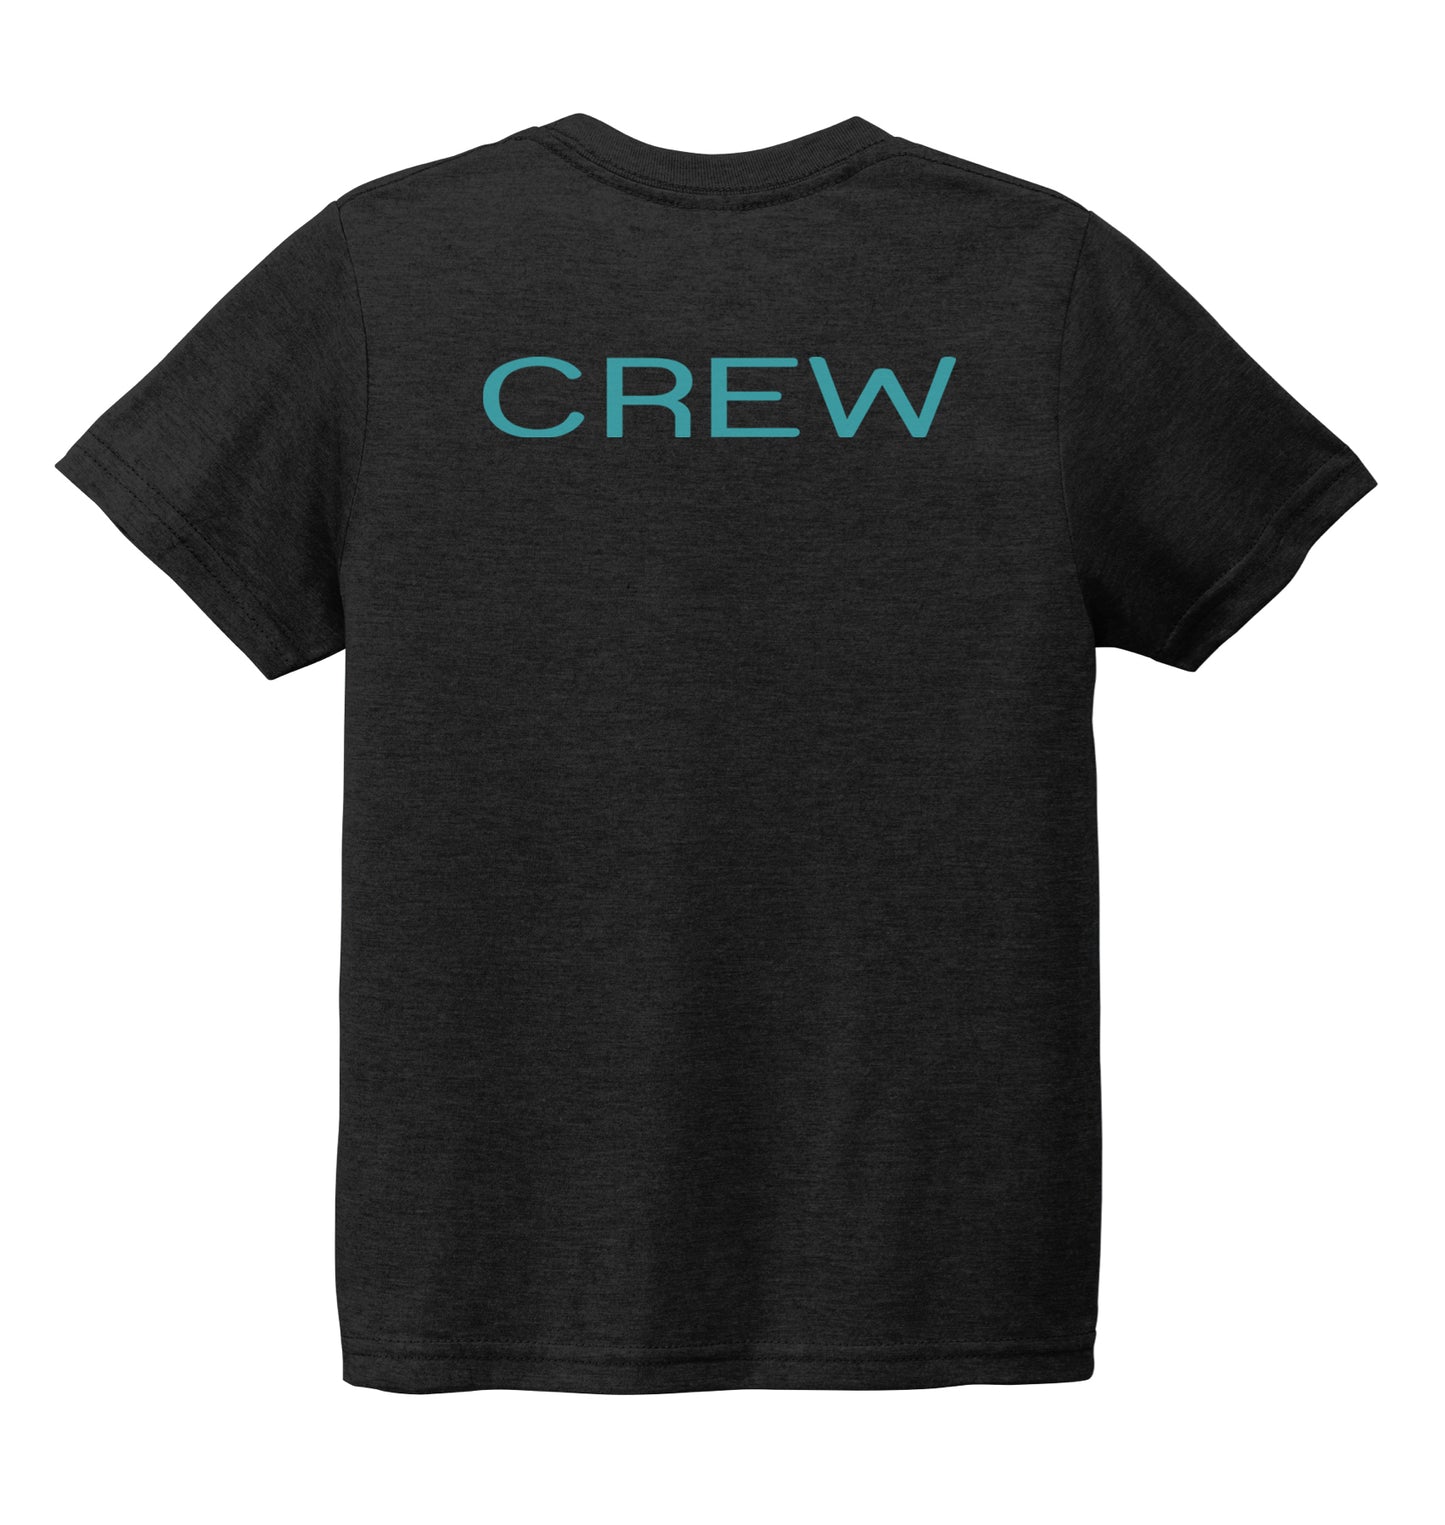 Youth’s Crew T-Shirt